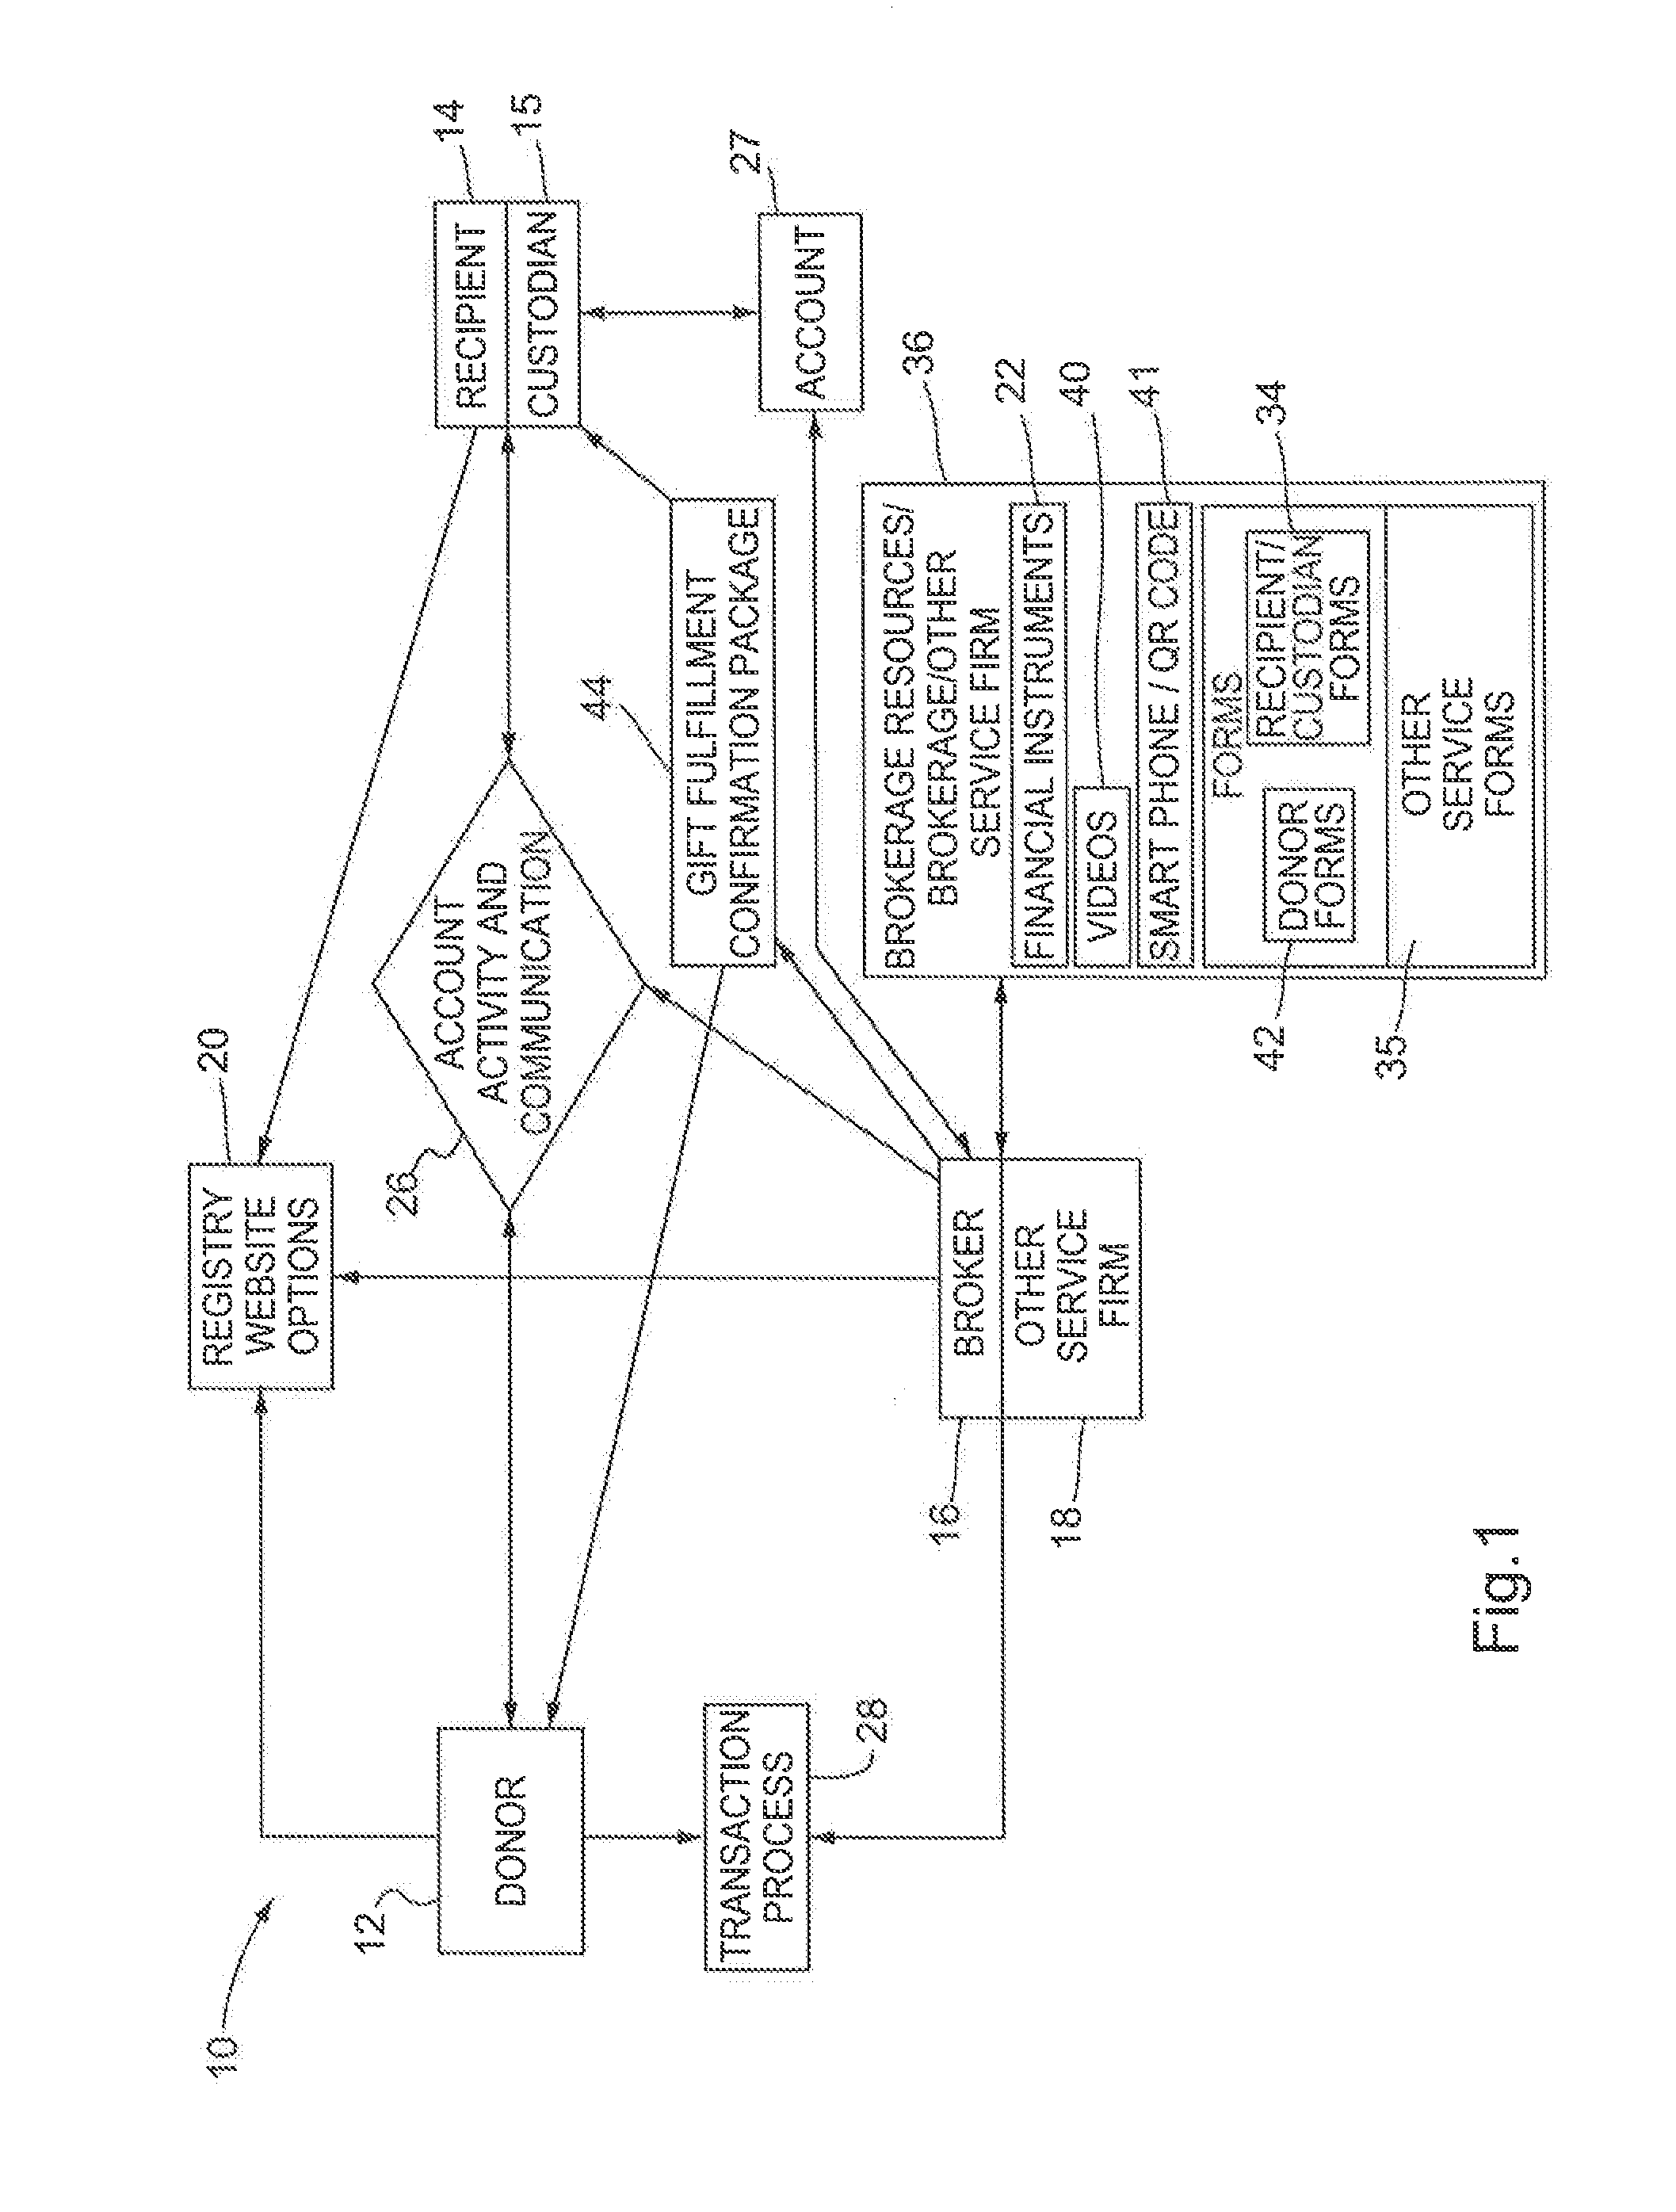 Financial transaction gift registry system and methods